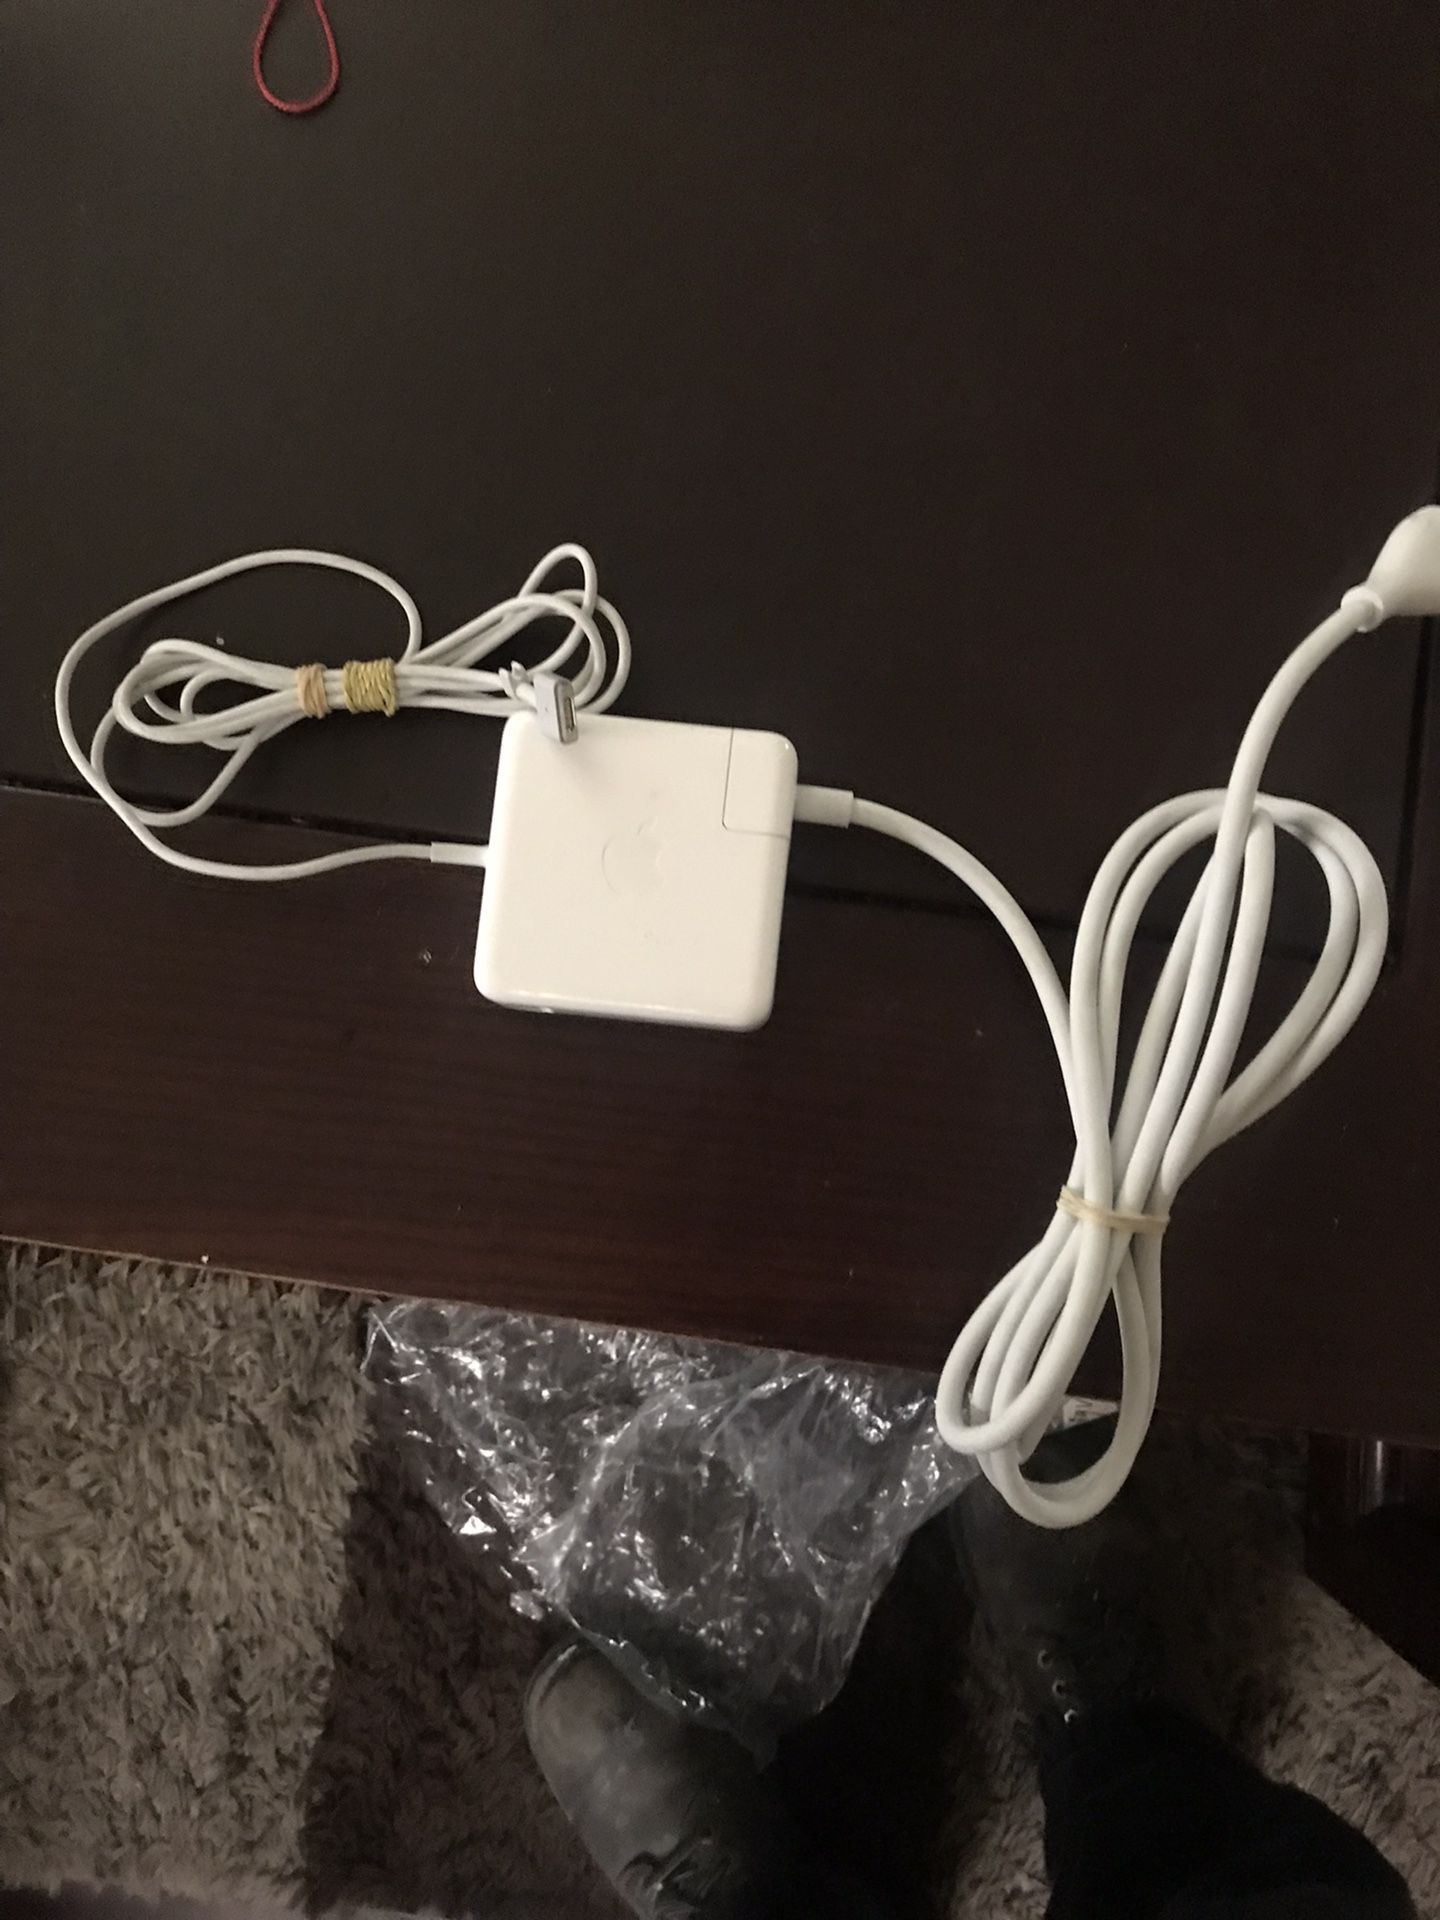 Apple 60W and 80w MagSafe 2 Power Adapter  (MacBook Pro 